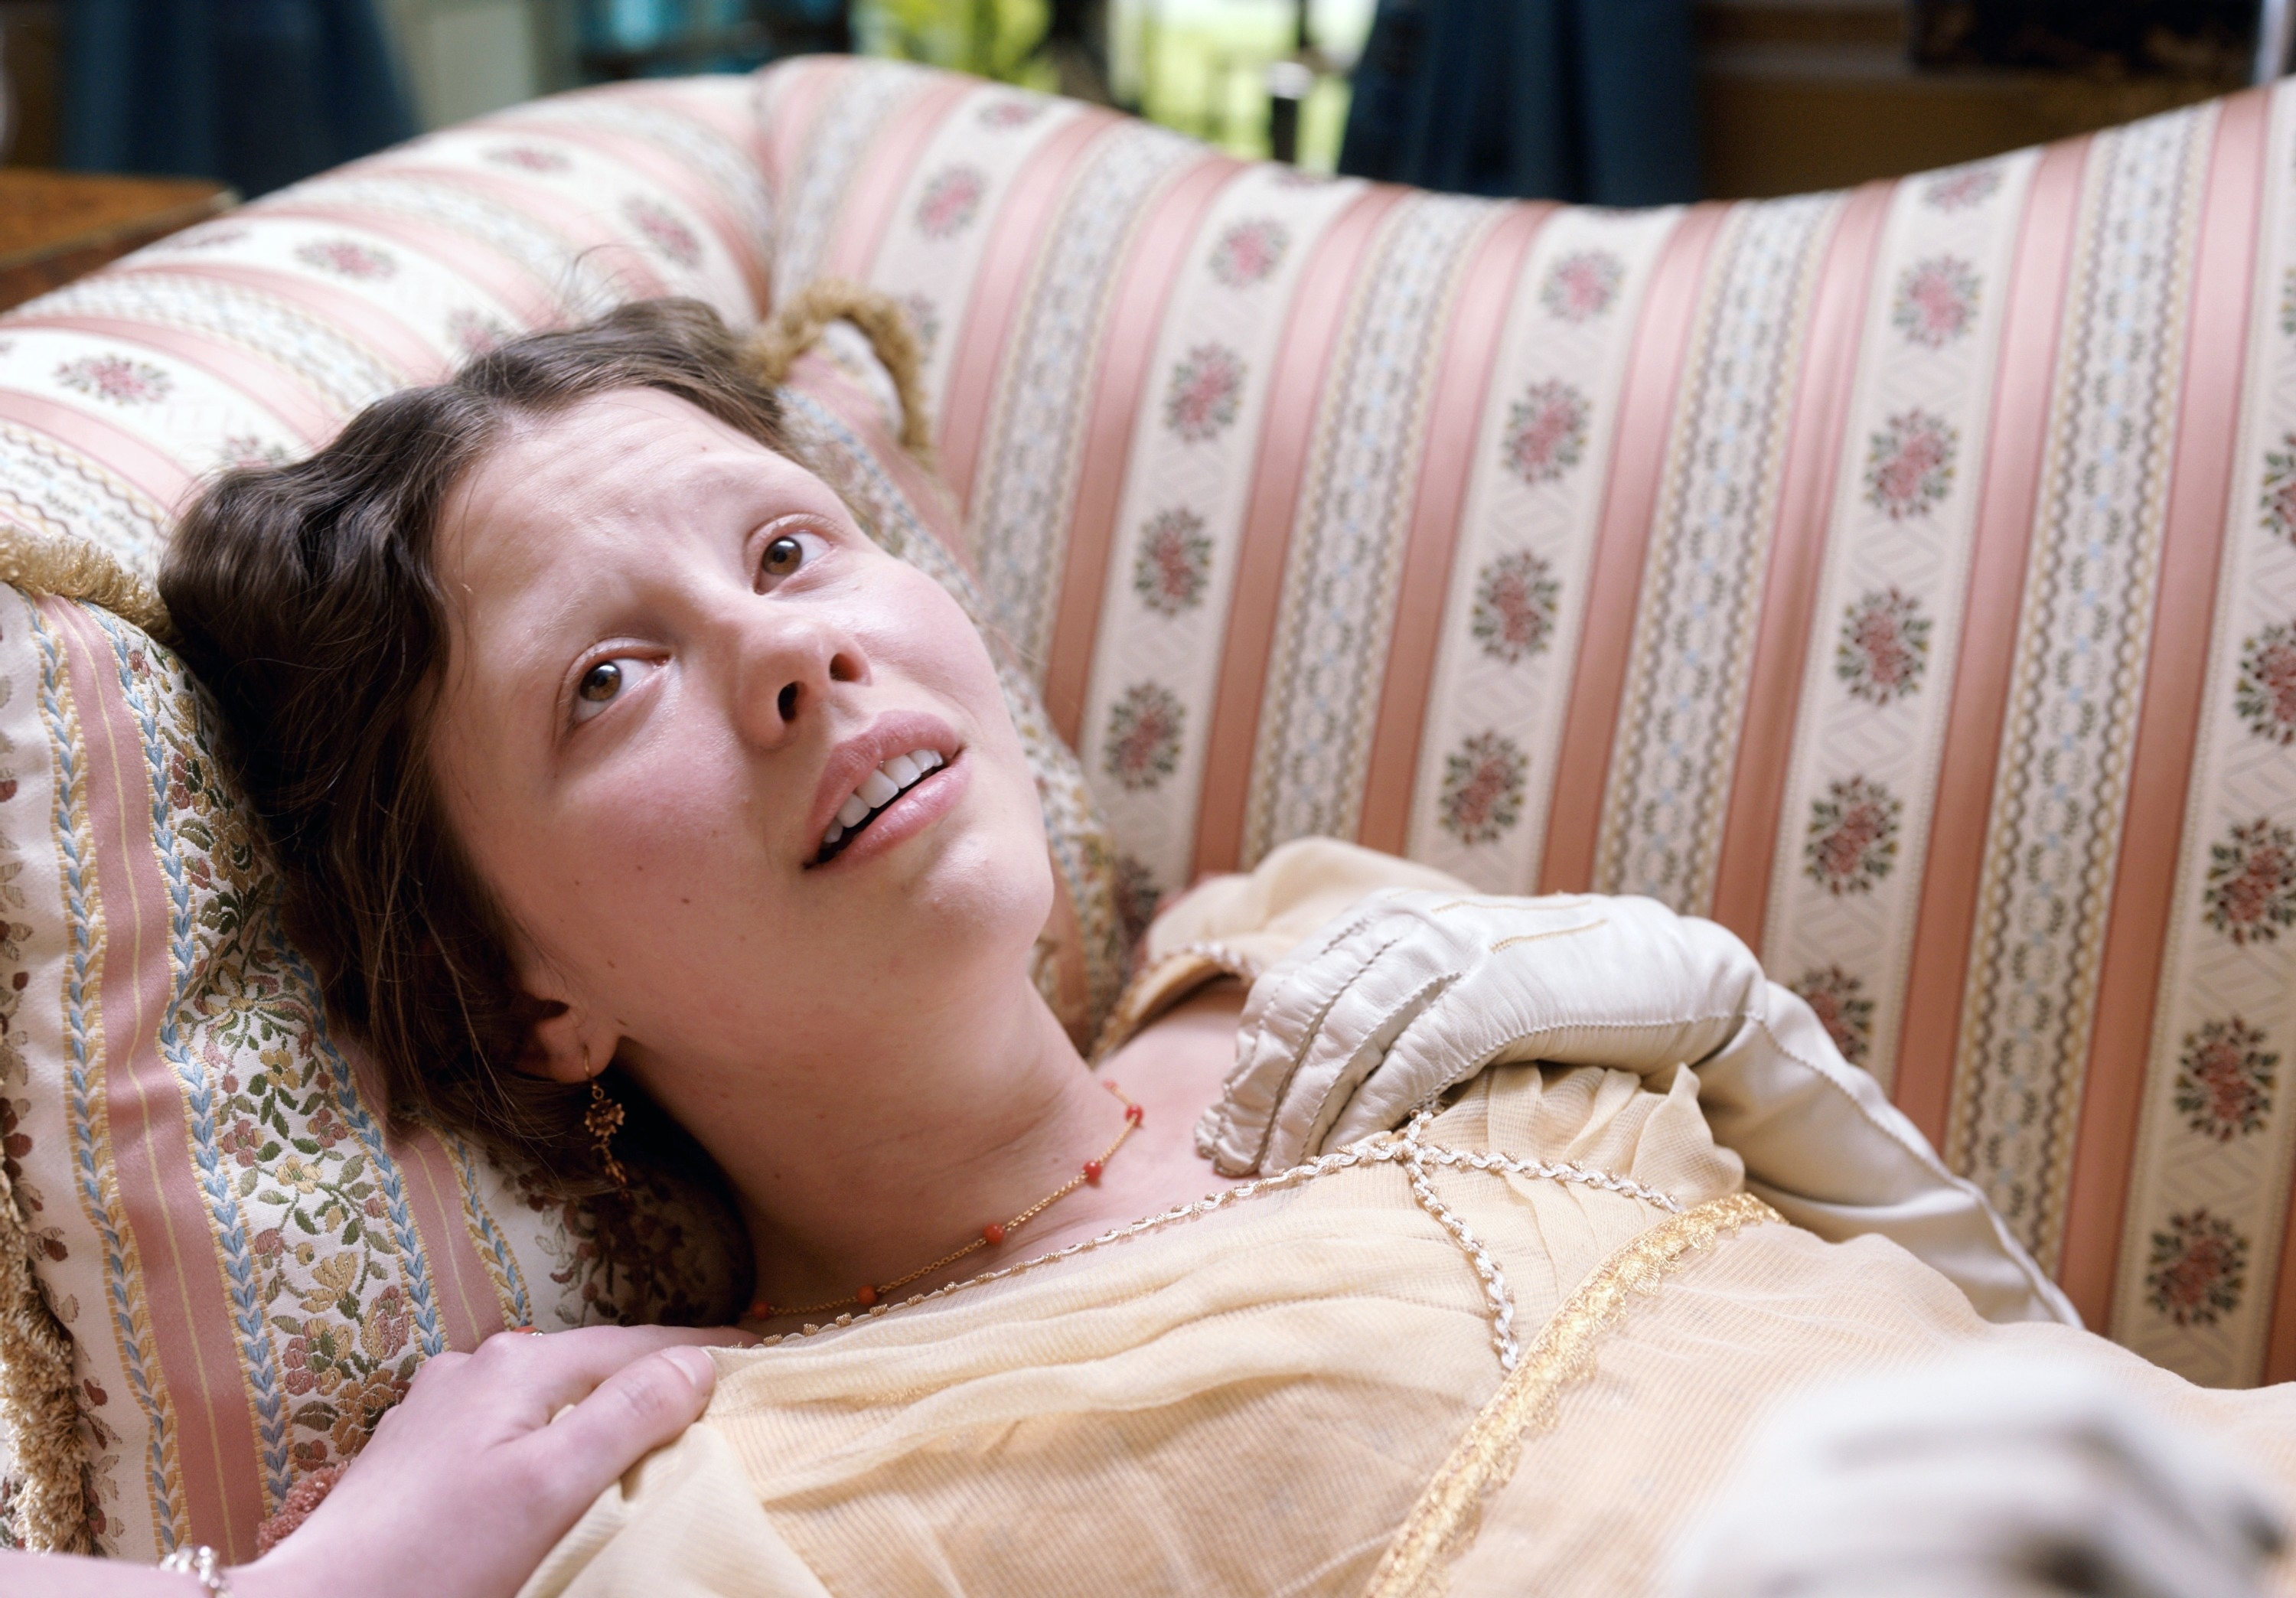 Mia Goth on a patterned couch in a scene from &quot;Emma&quot;